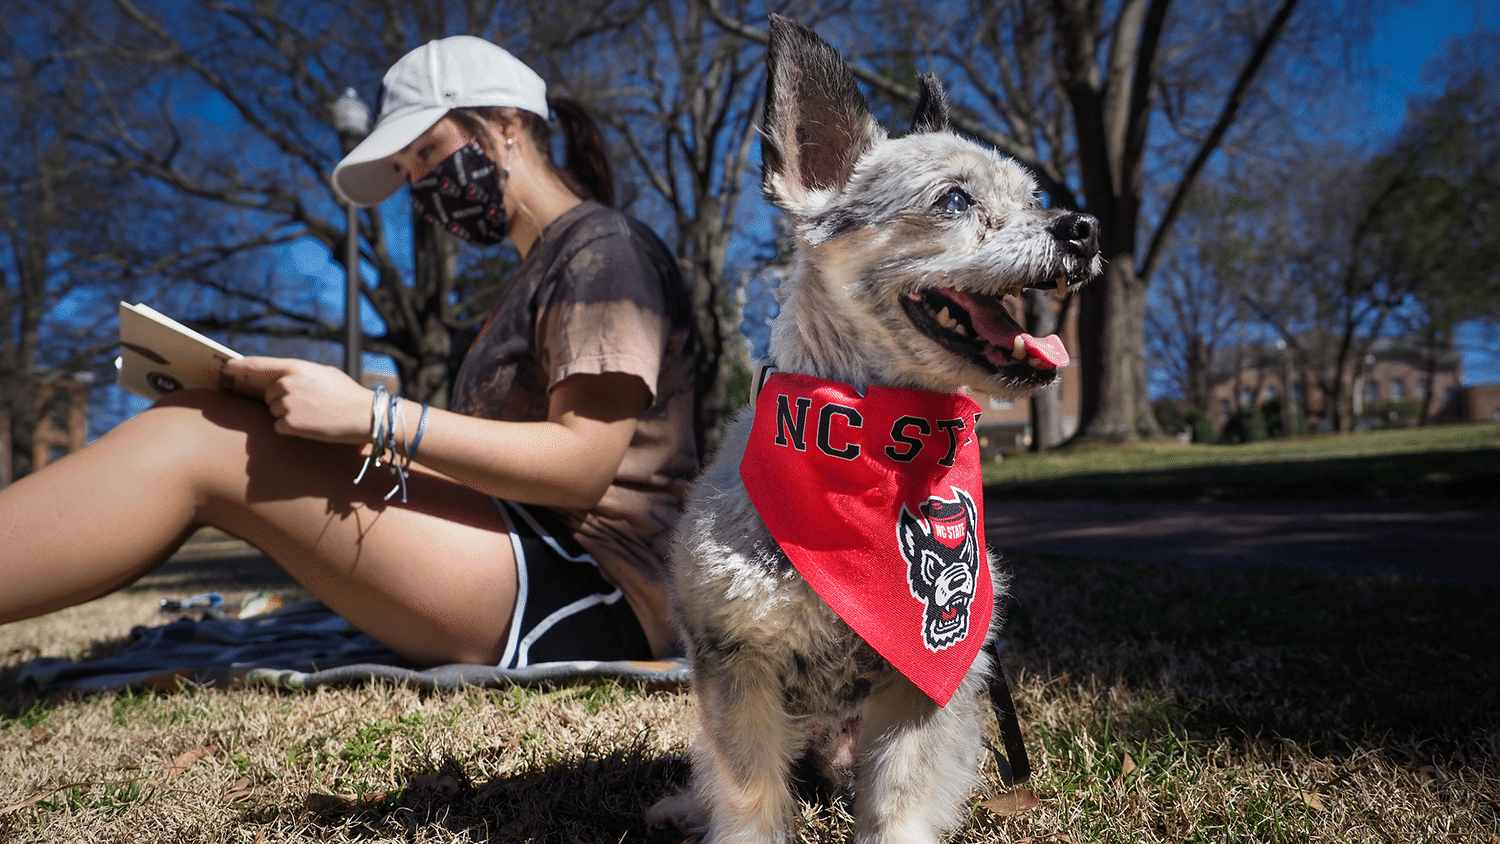 A dog with an NC State bandana stands near their owner, who is wearing a face mask and sitting on the ground studying.